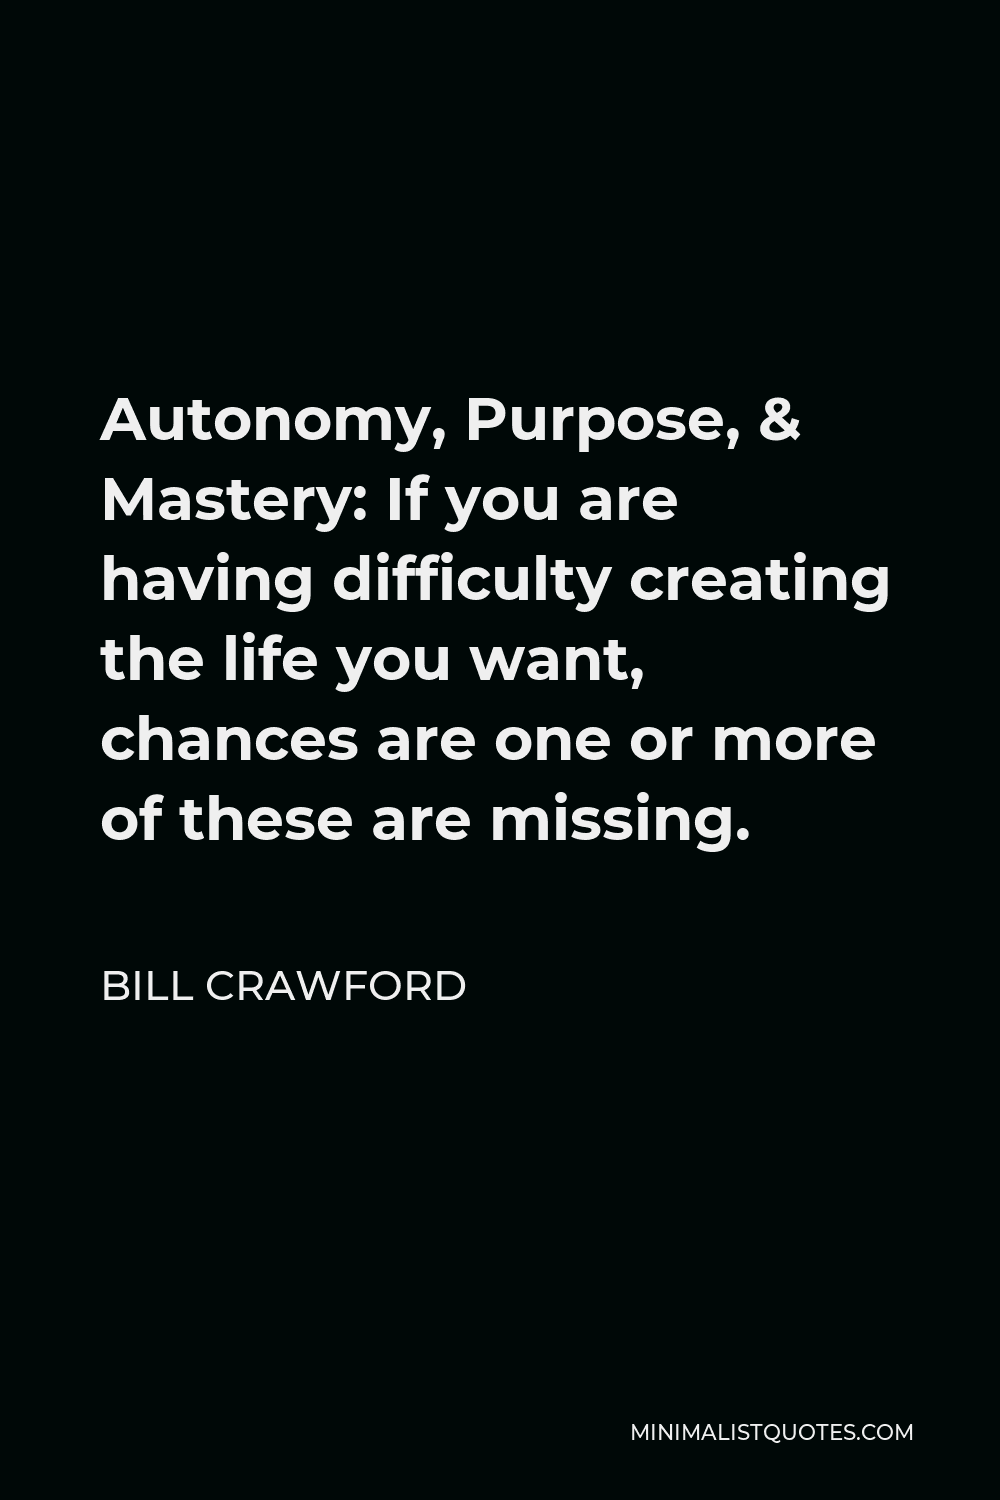 Bill Crawford Quote - Autonomy, Purpose, & Mastery: If you are having difficulty creating the life you want, chances are one or more of these are missing.